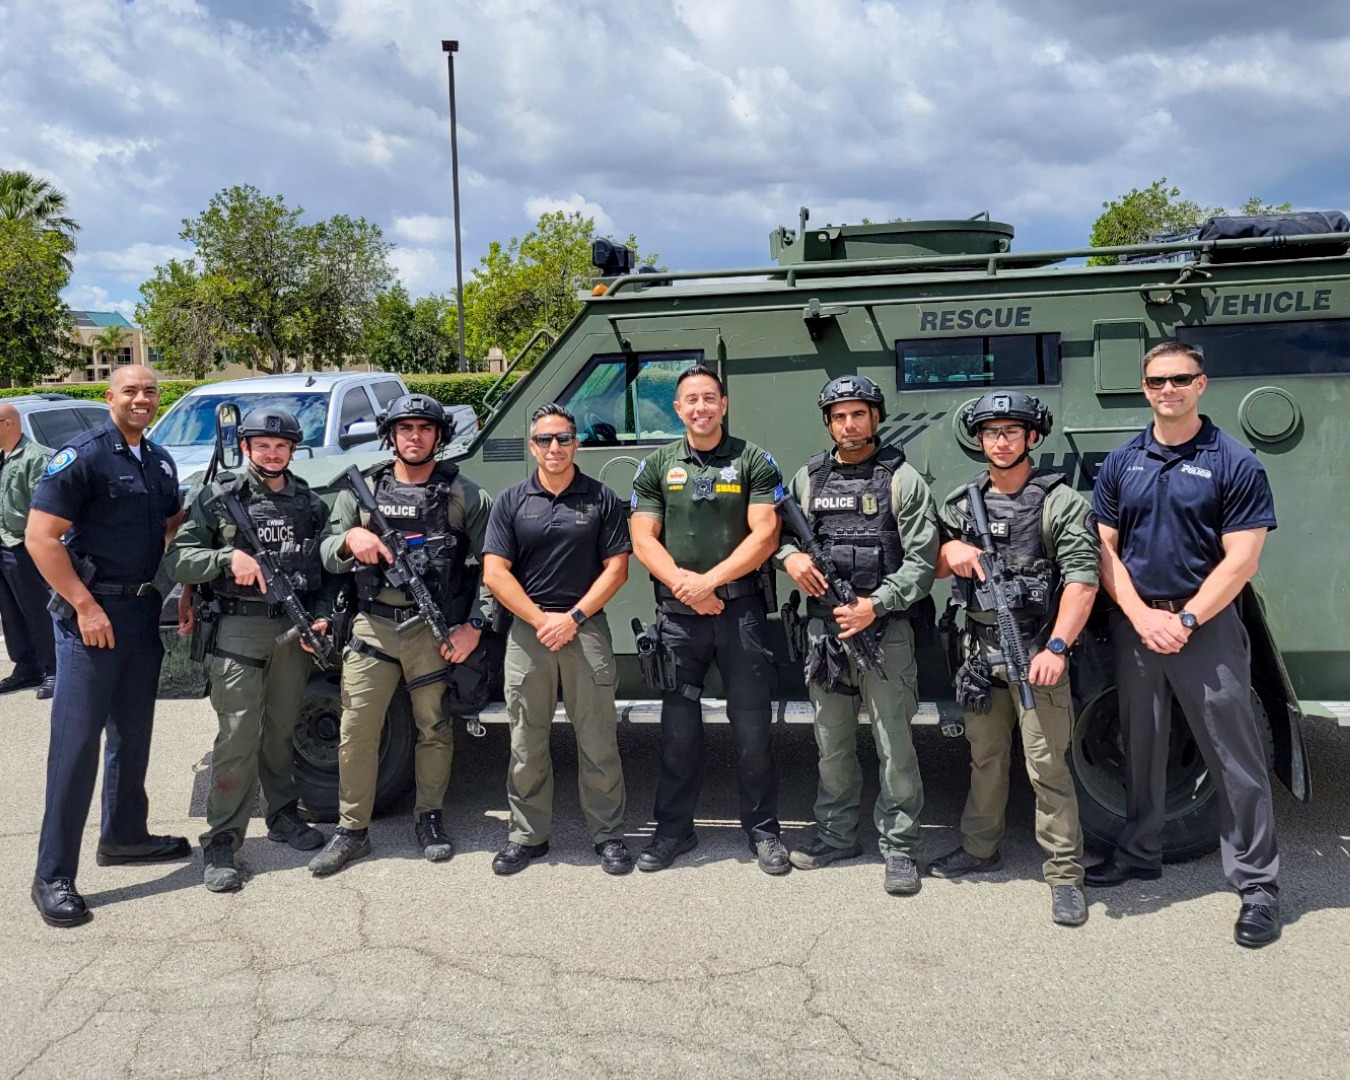 A police SWAT team poses in front of an Army green armored vehicle holding weapons.